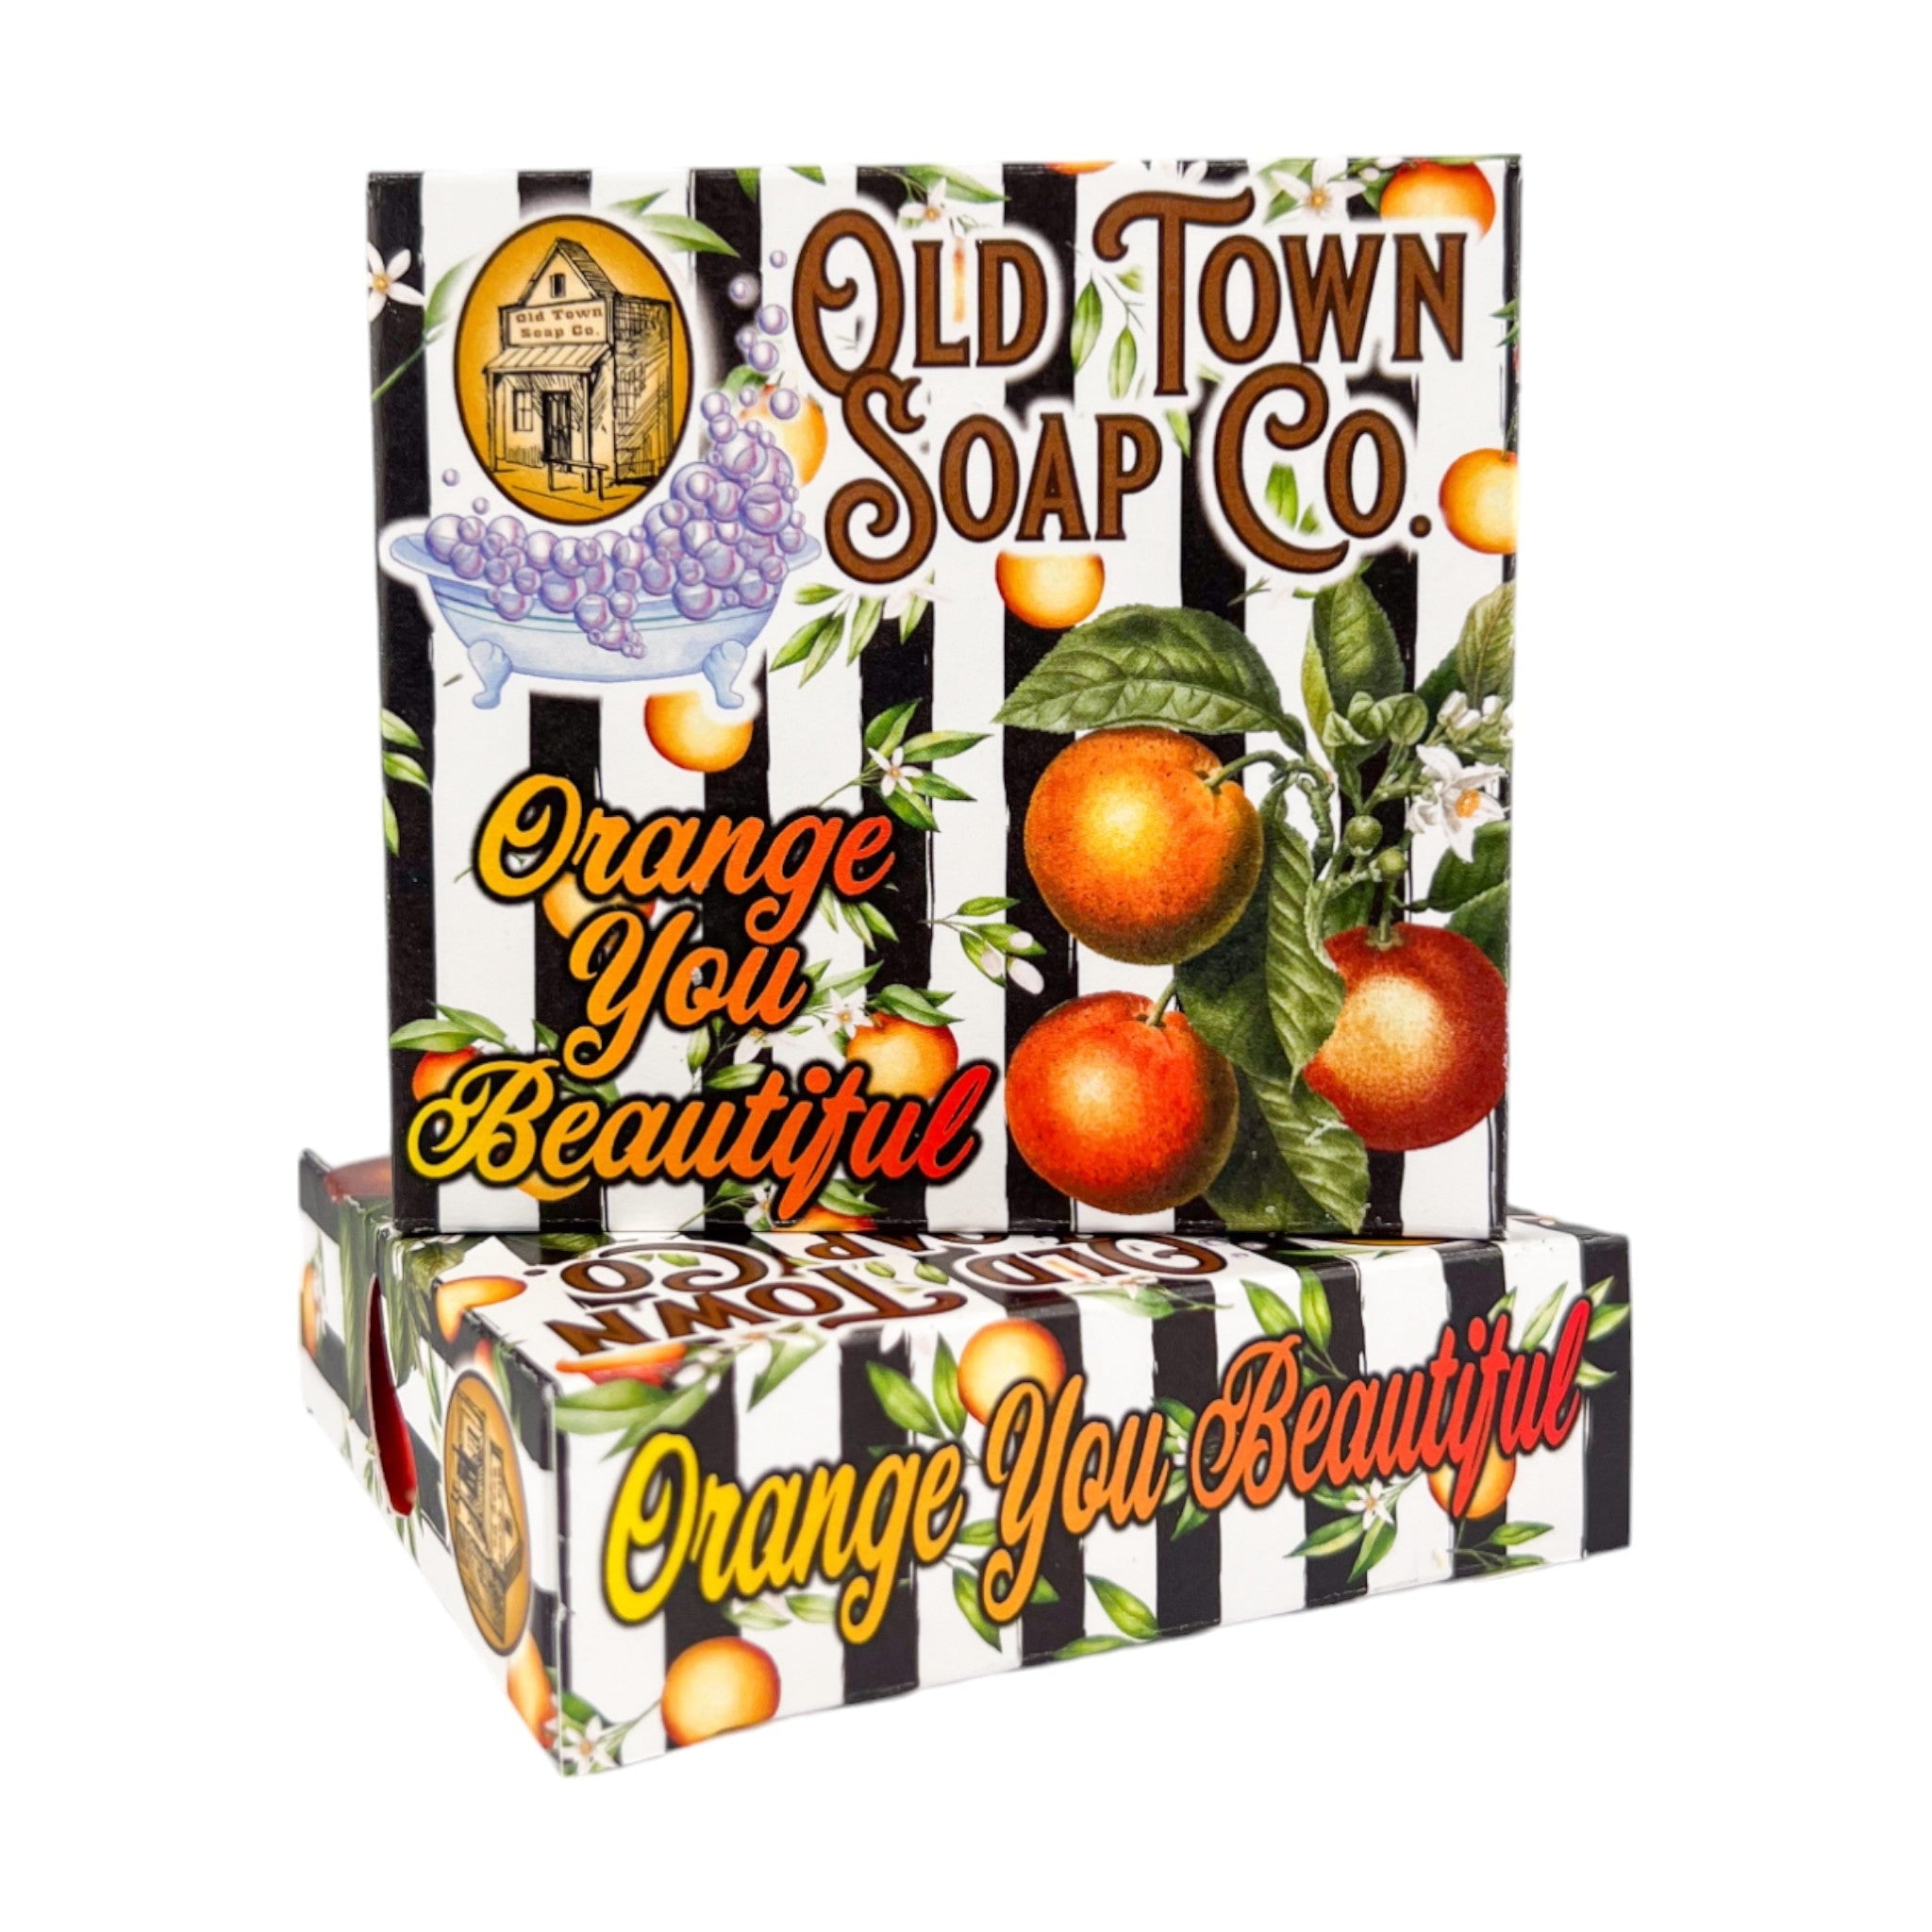 Orange You Beautiful -Bar Soap - Old Town Soap Co.